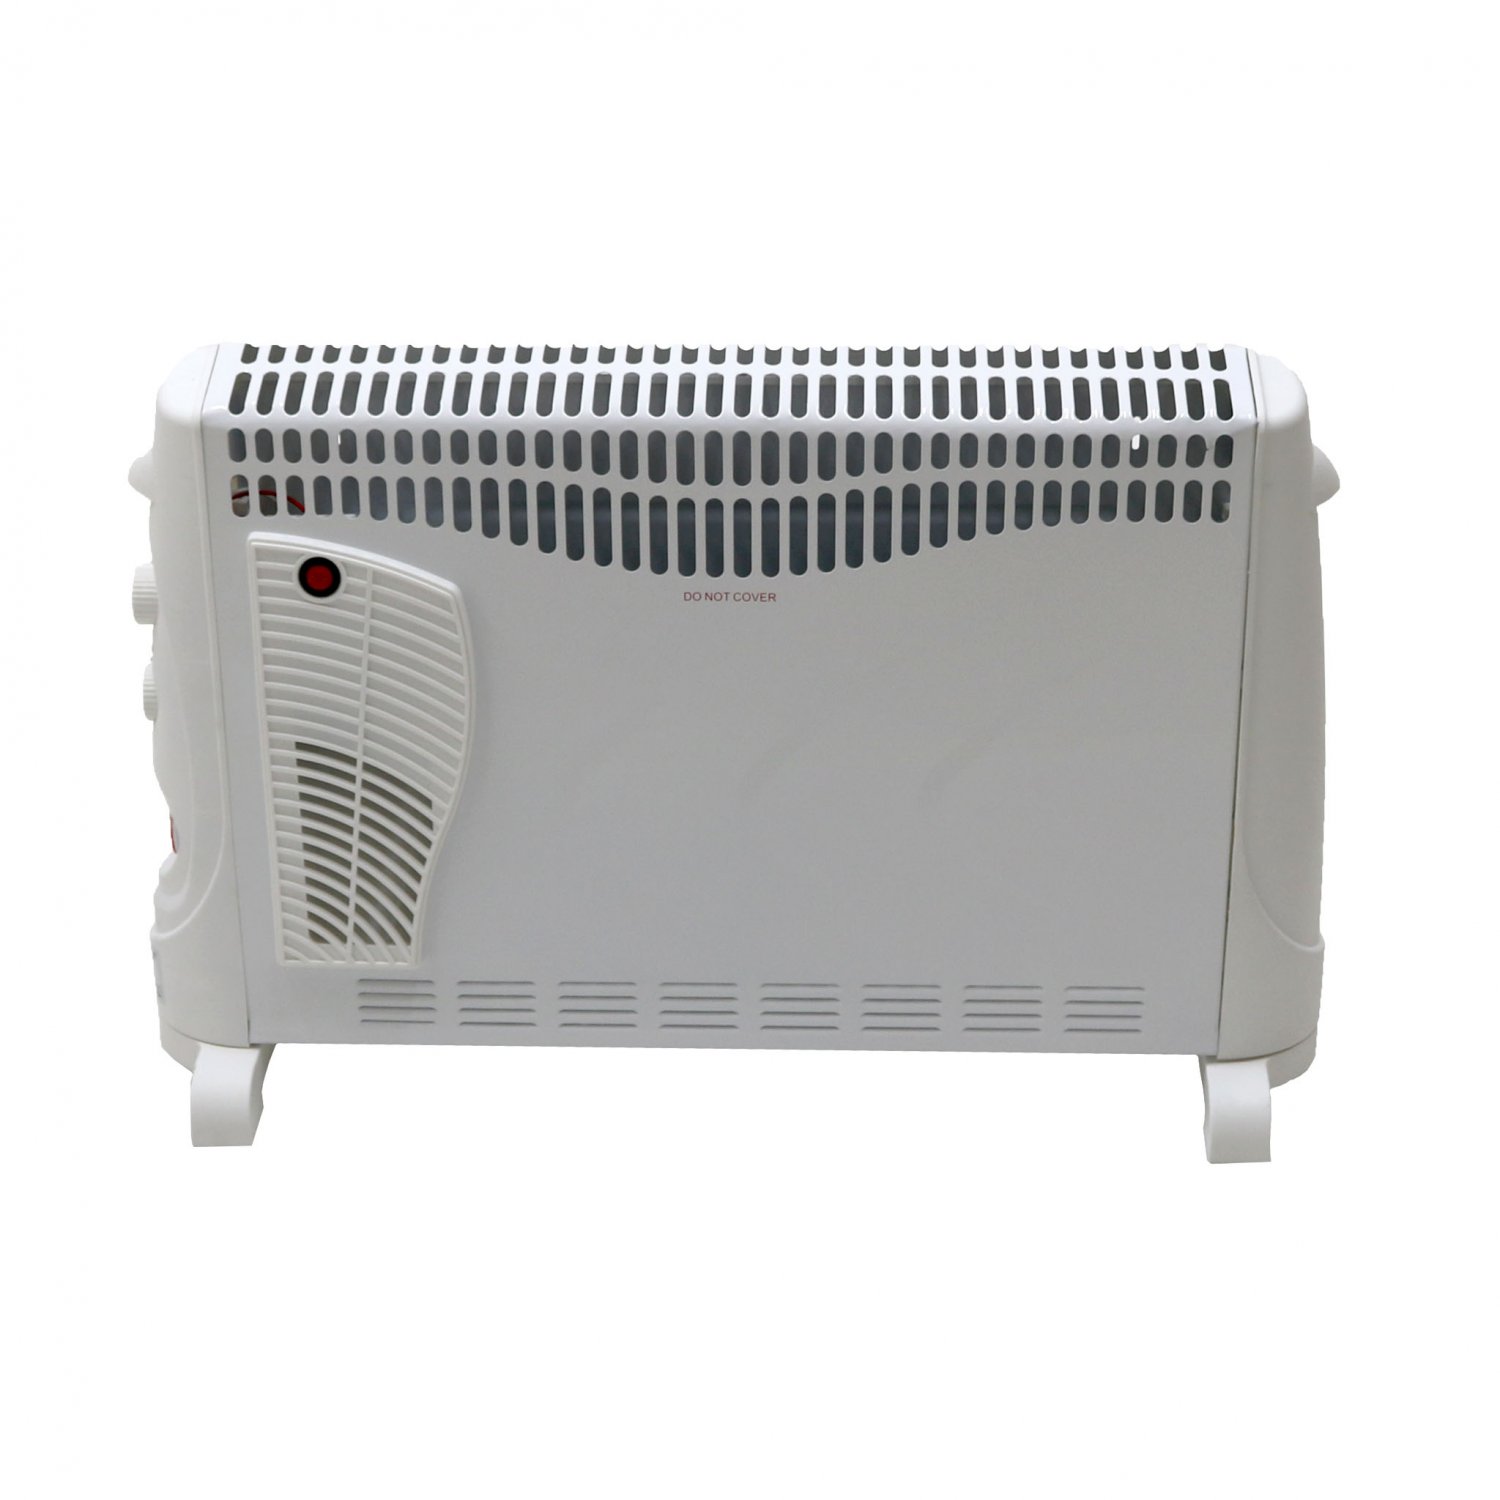 3 Heat Settings Turbo and Timer Oypla 2kW Convector Heater 